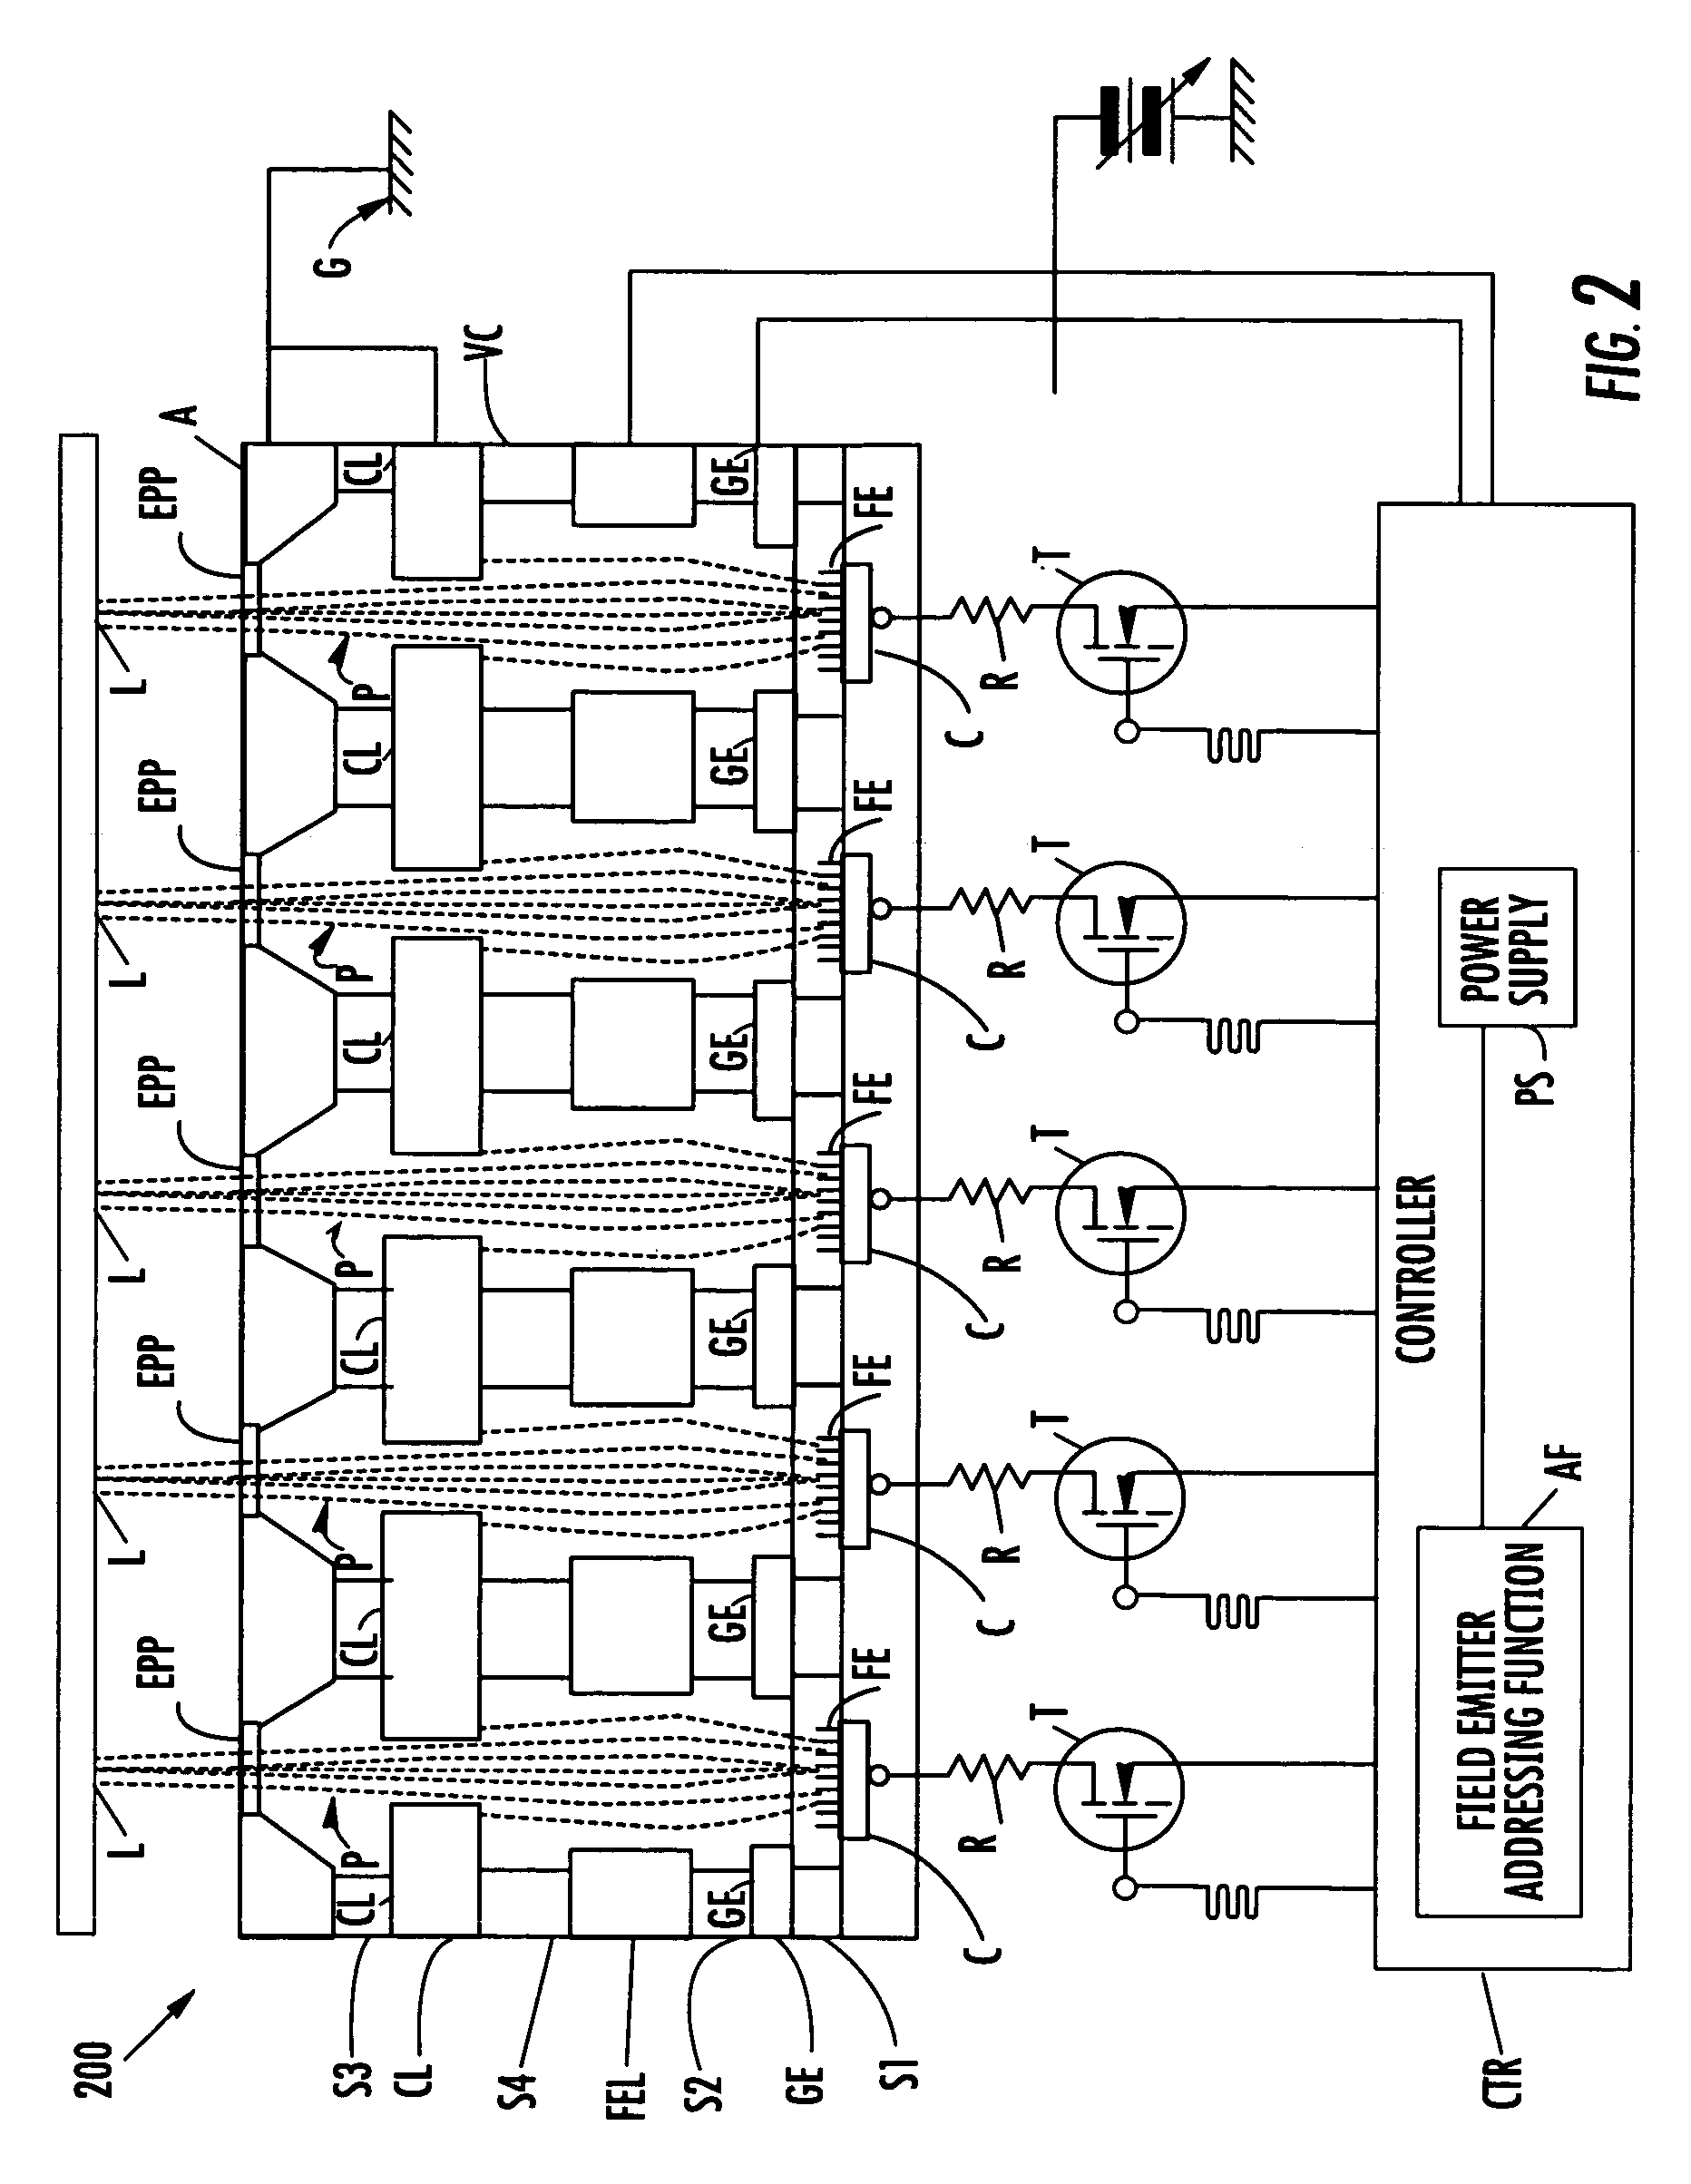 Multi-pixel electron microbeam irradiator systems and methods for selectively irradiating predetermined locations